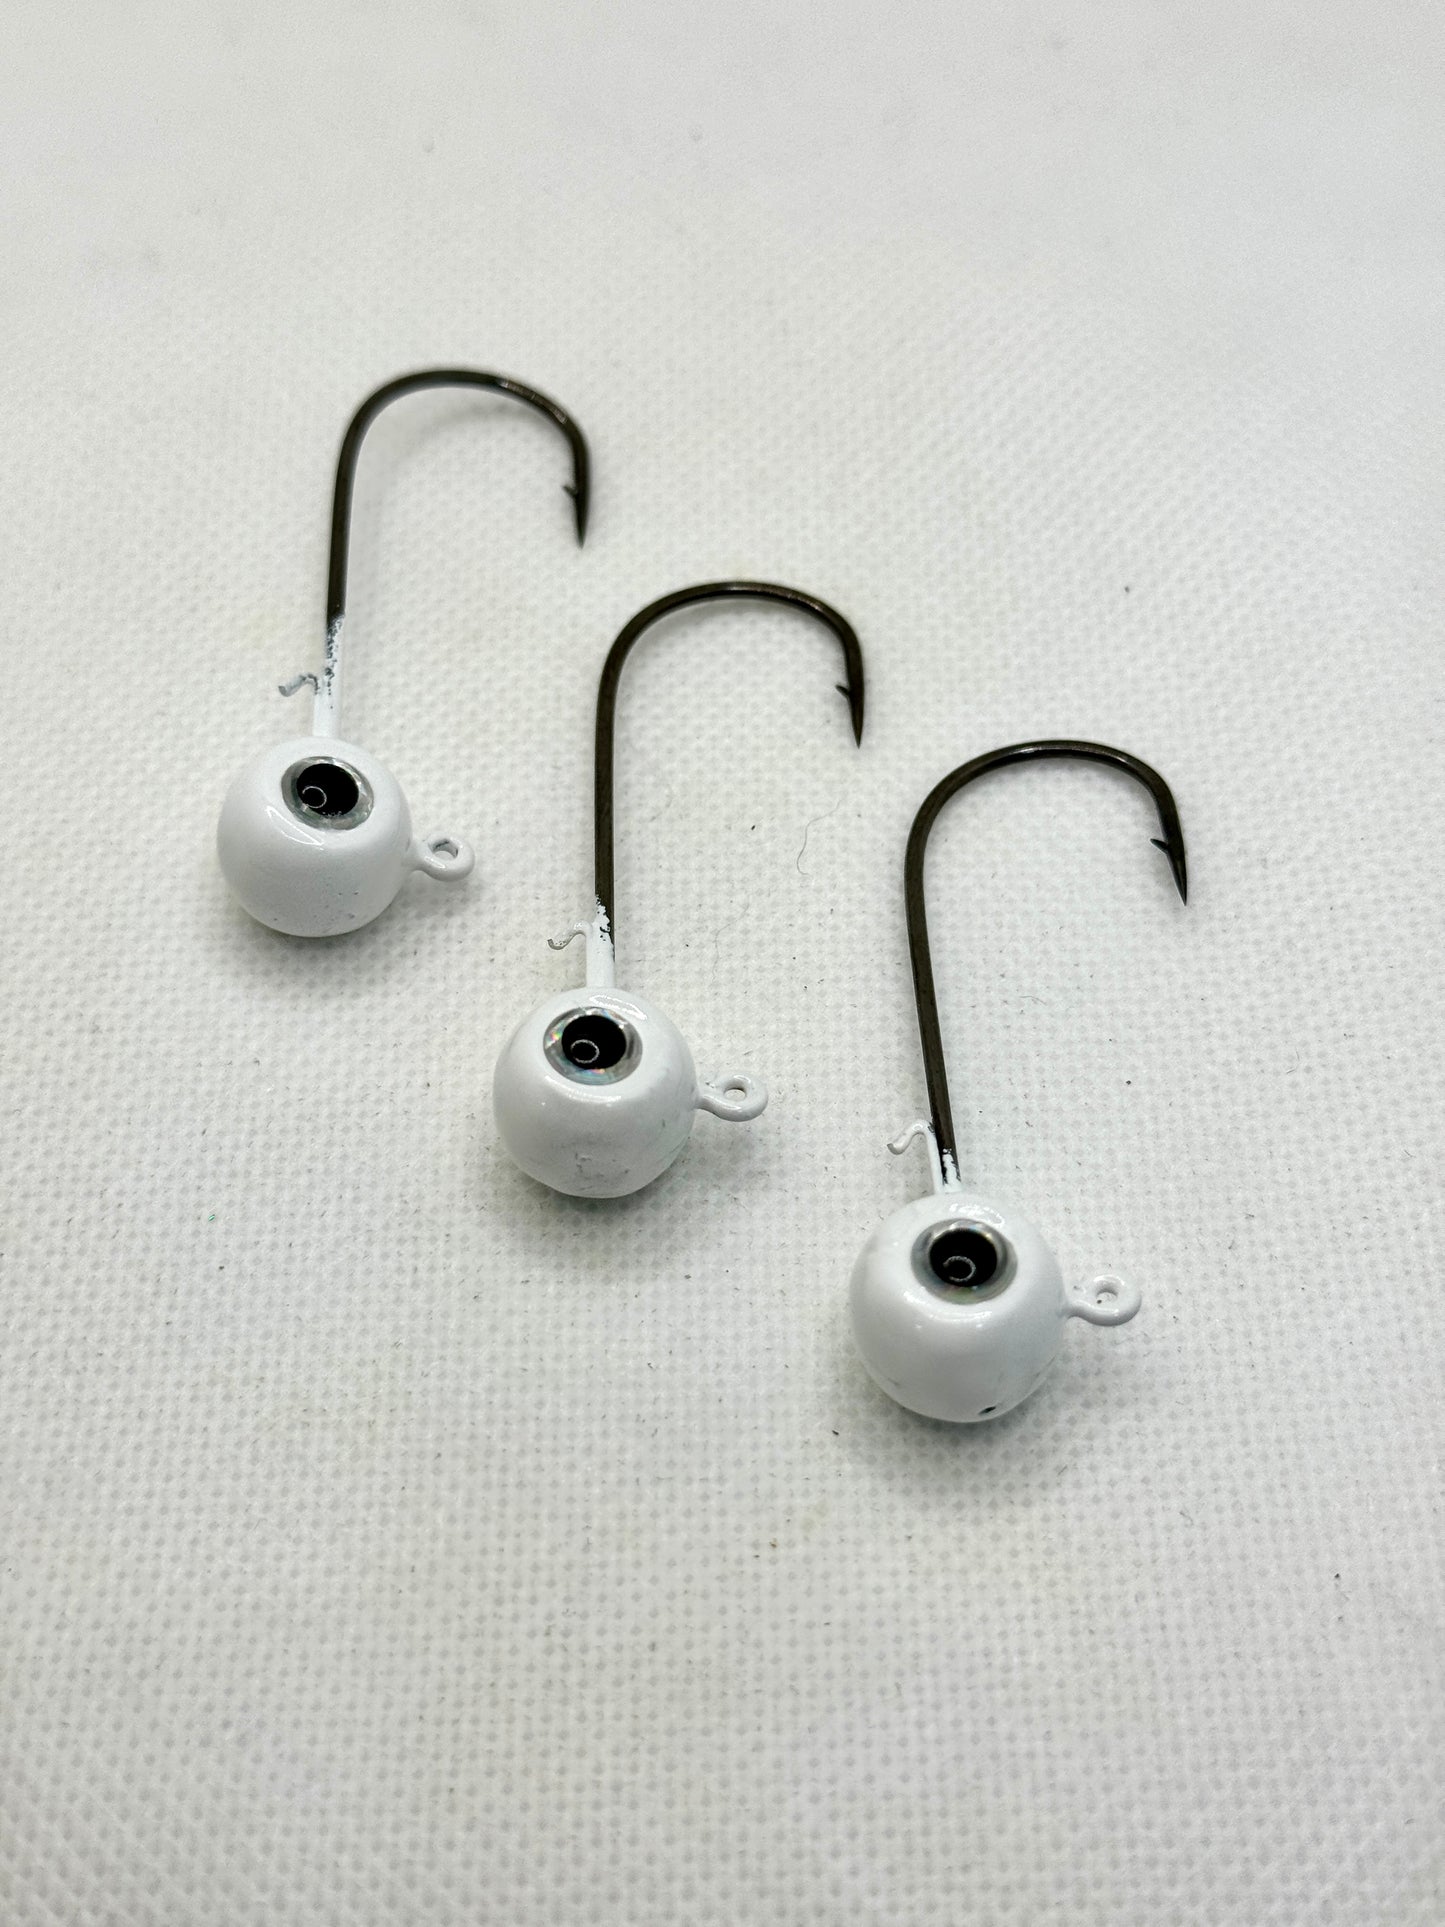 Vision Heads (Pro Series)